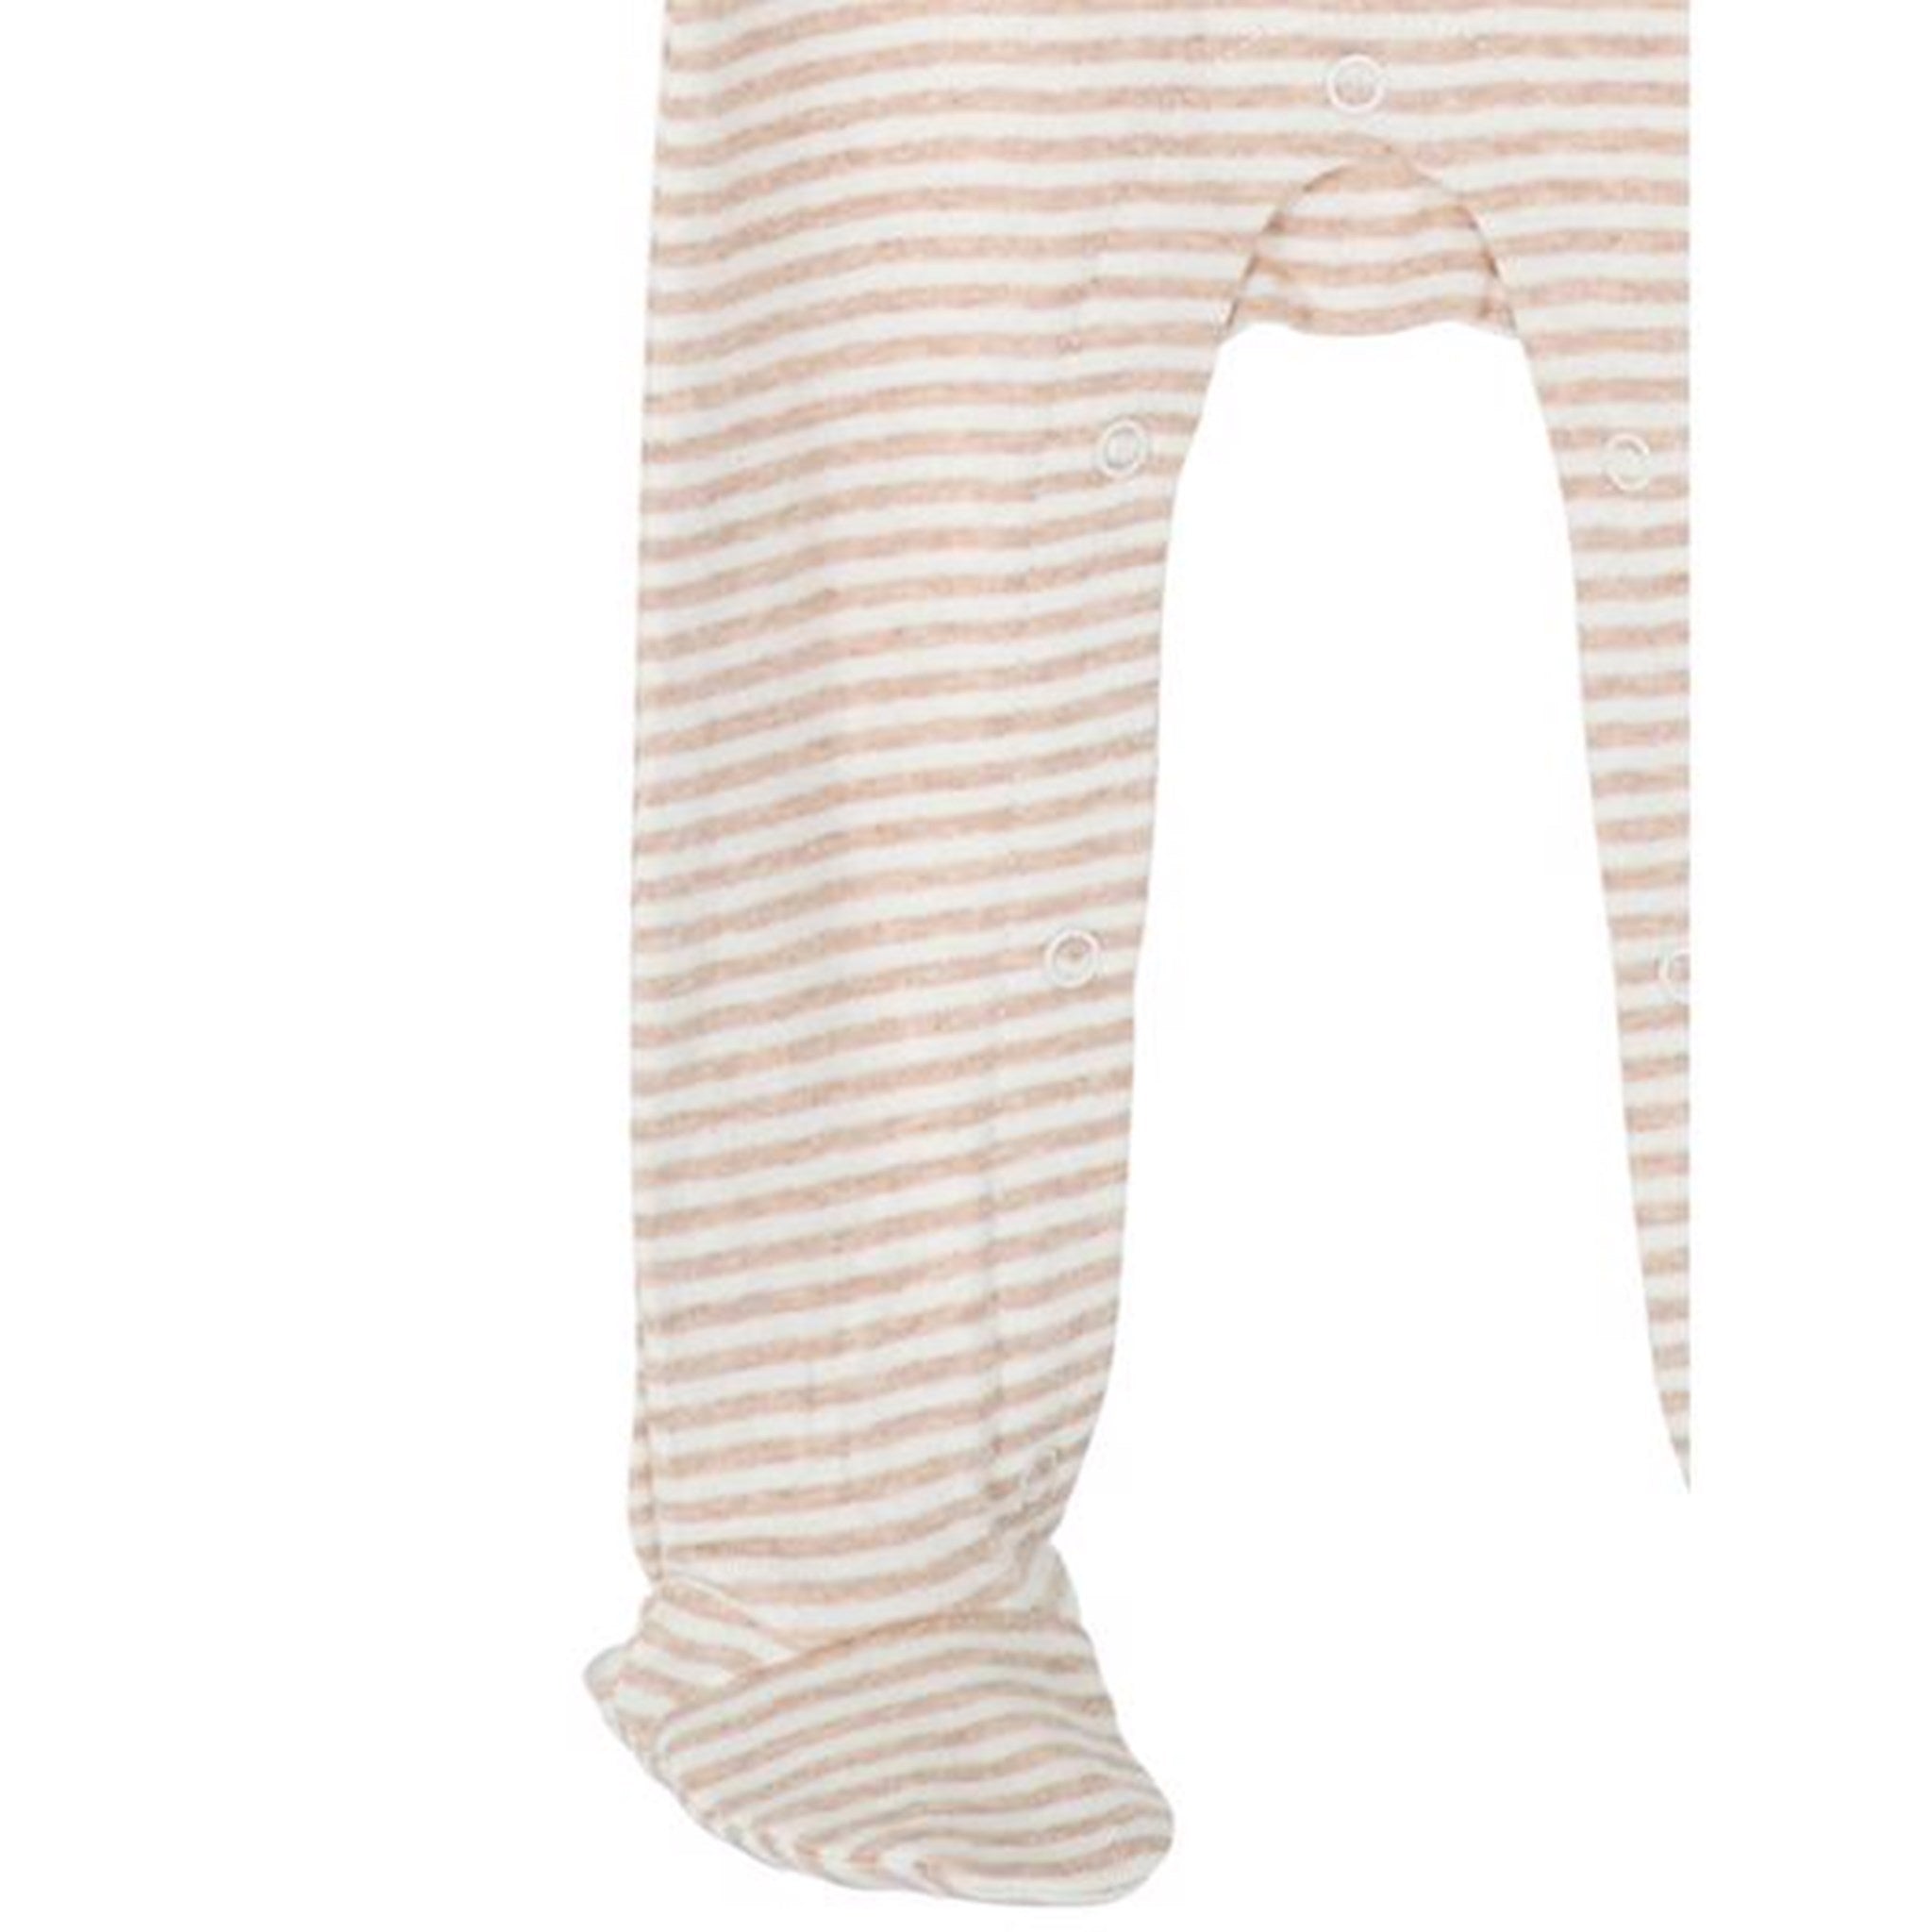 Serendipity Oat/Offwhite Baby Suit Stripe 2